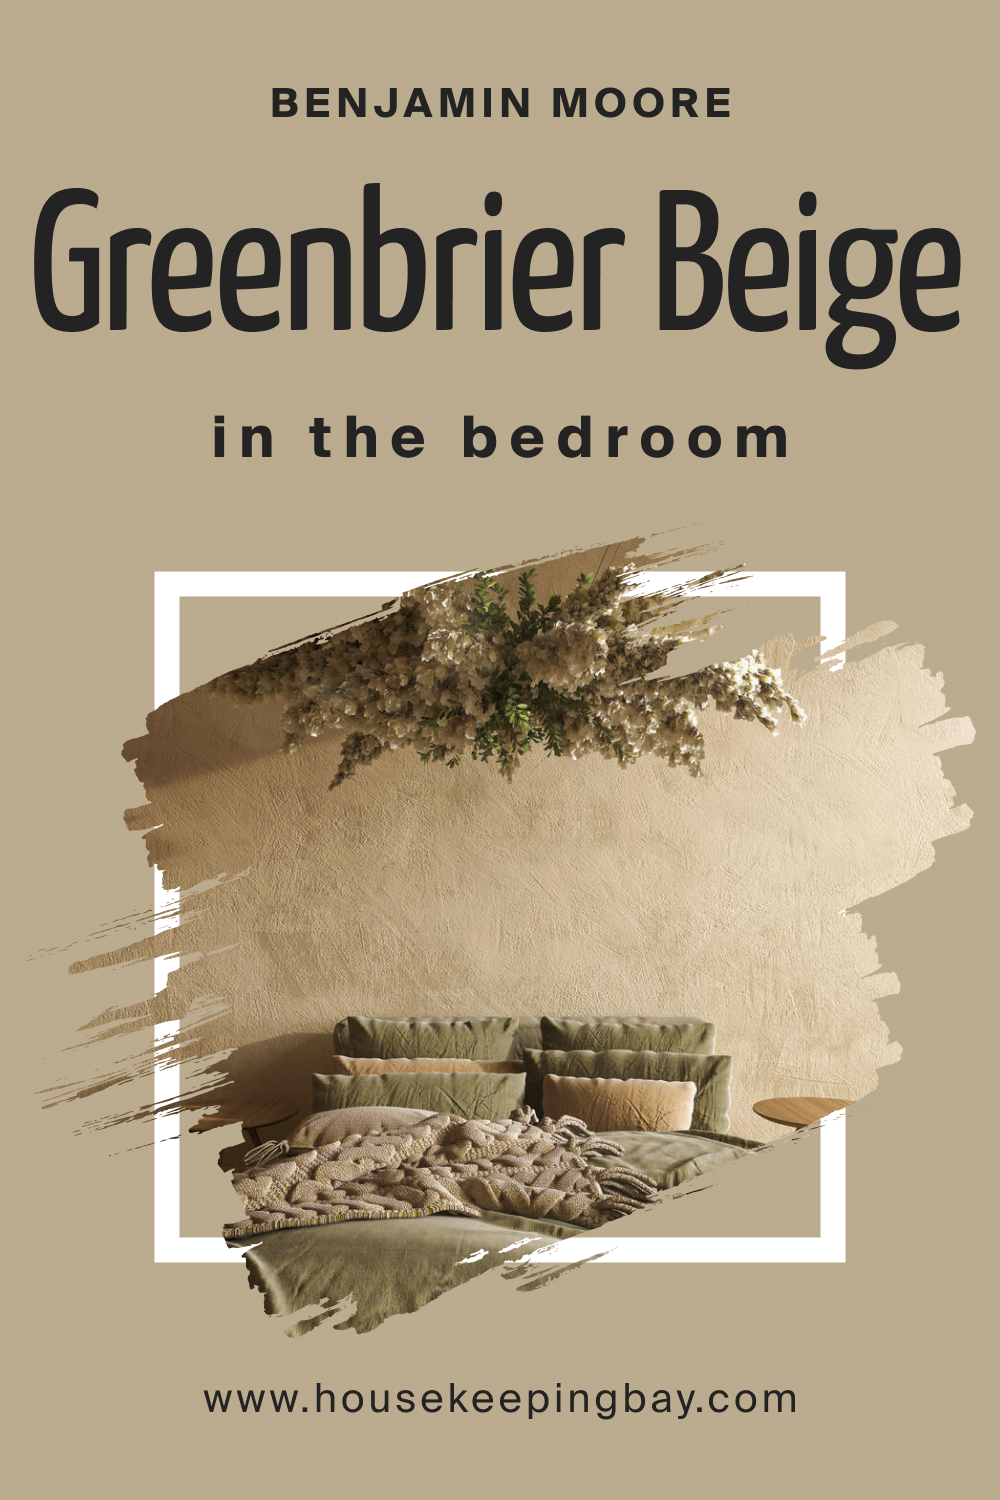 How to Use BM Greenbrier Beige HC-79 in the Bedroom?